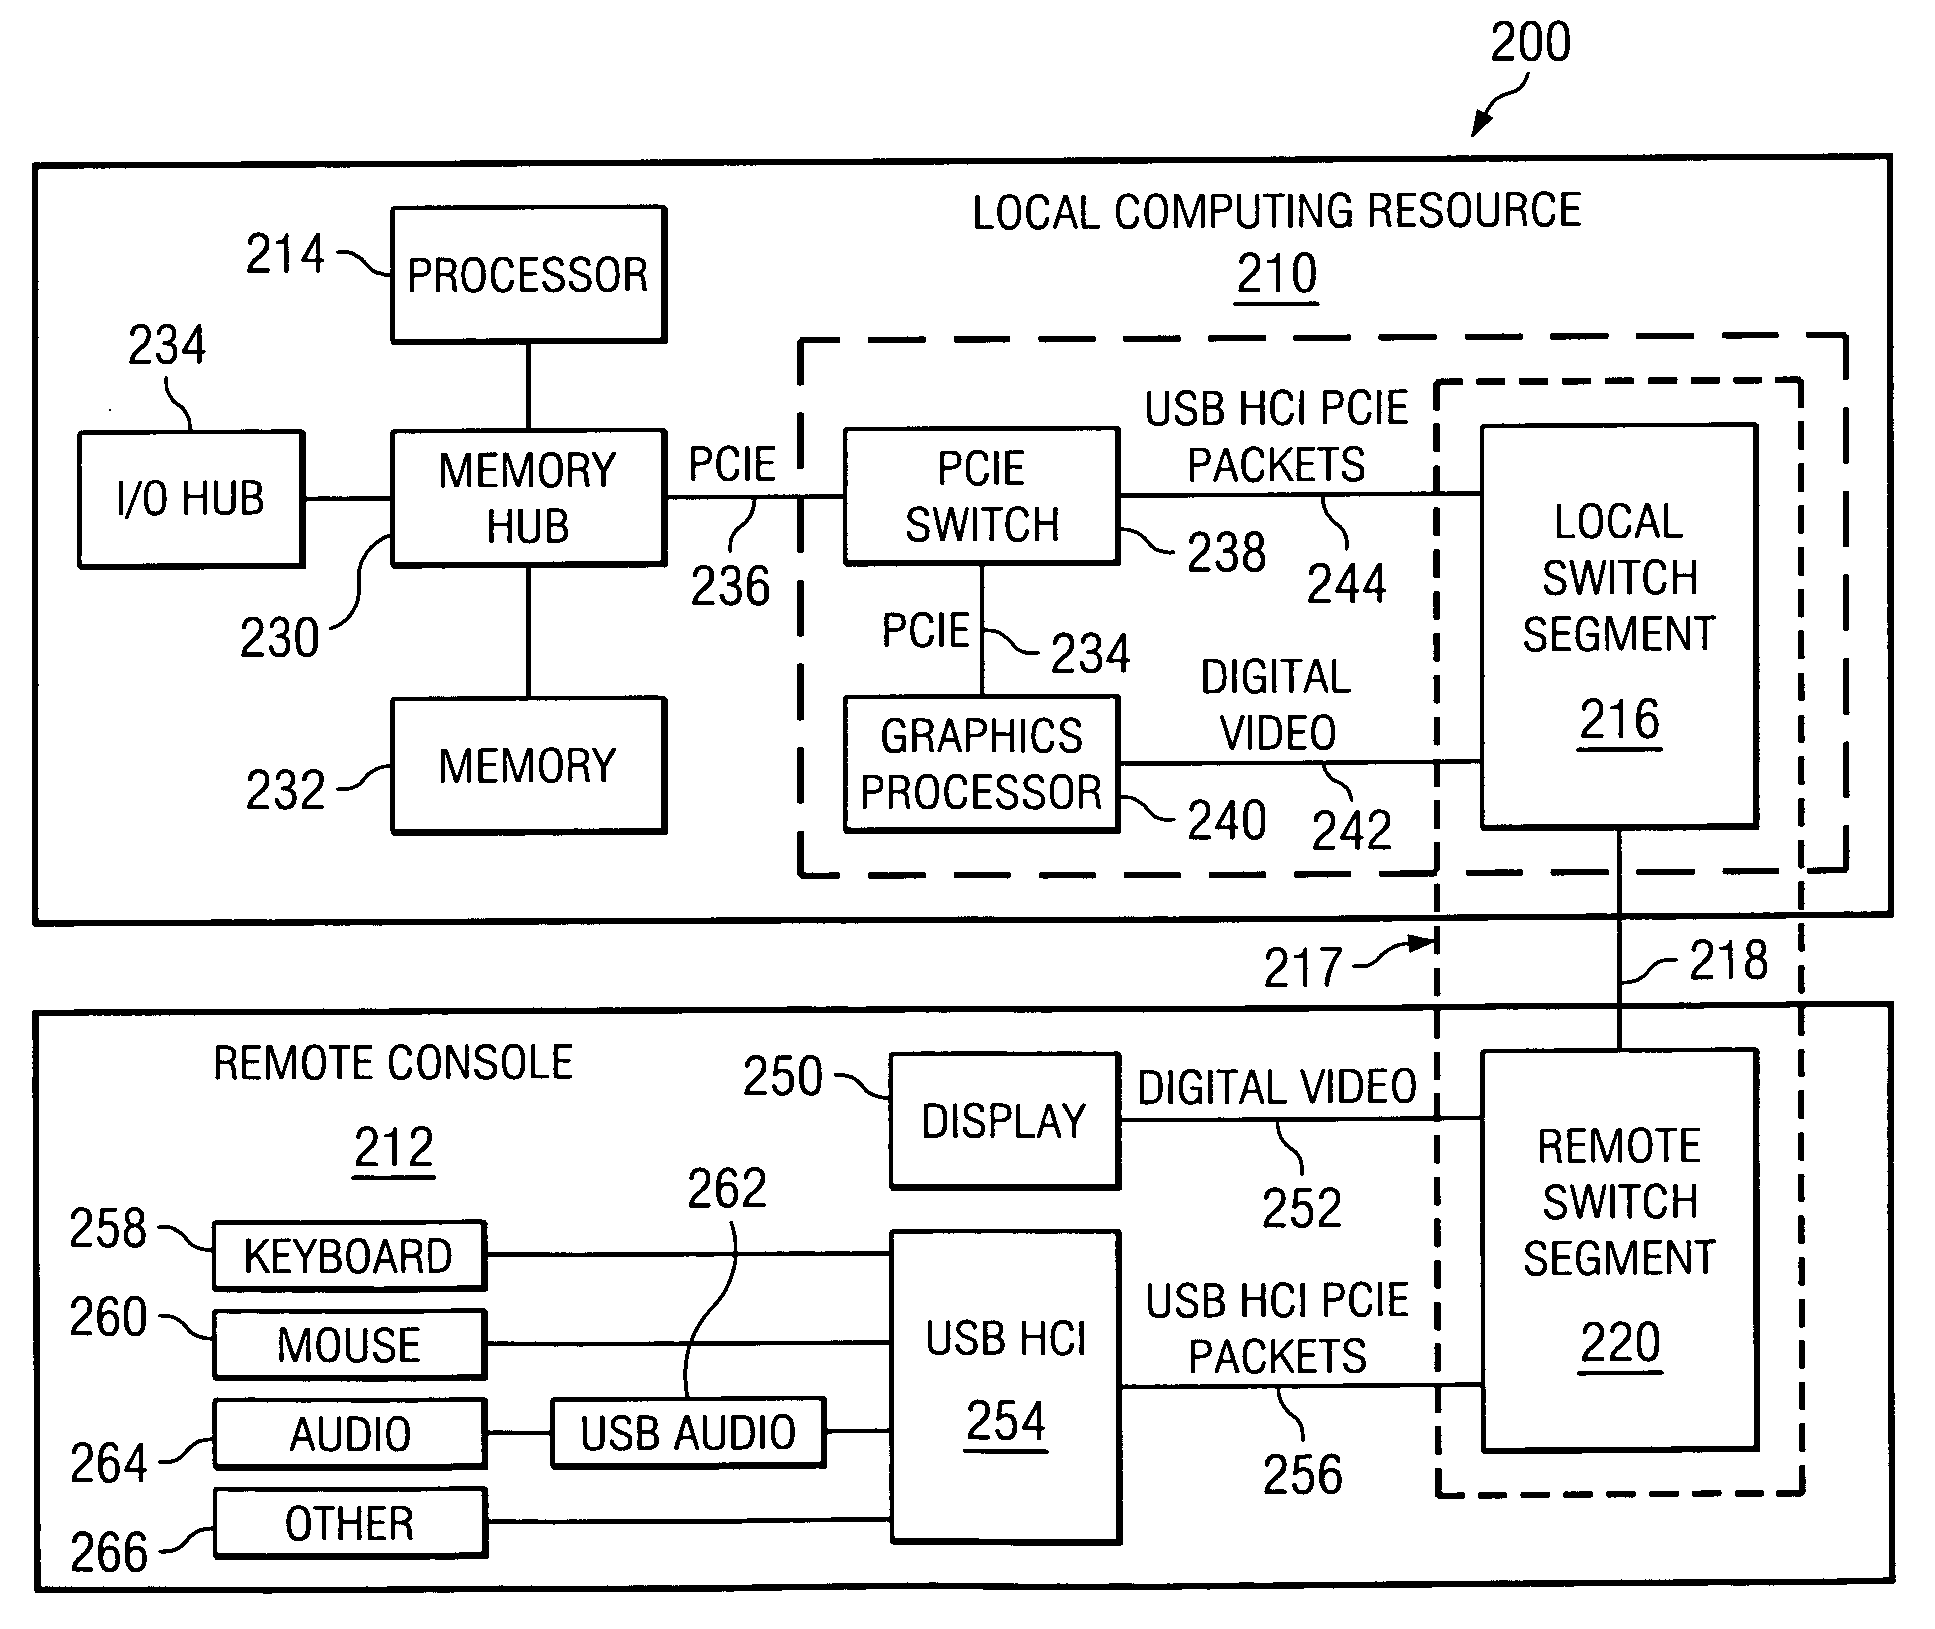 System and method for communicating between a computer cluster and a remote user interface